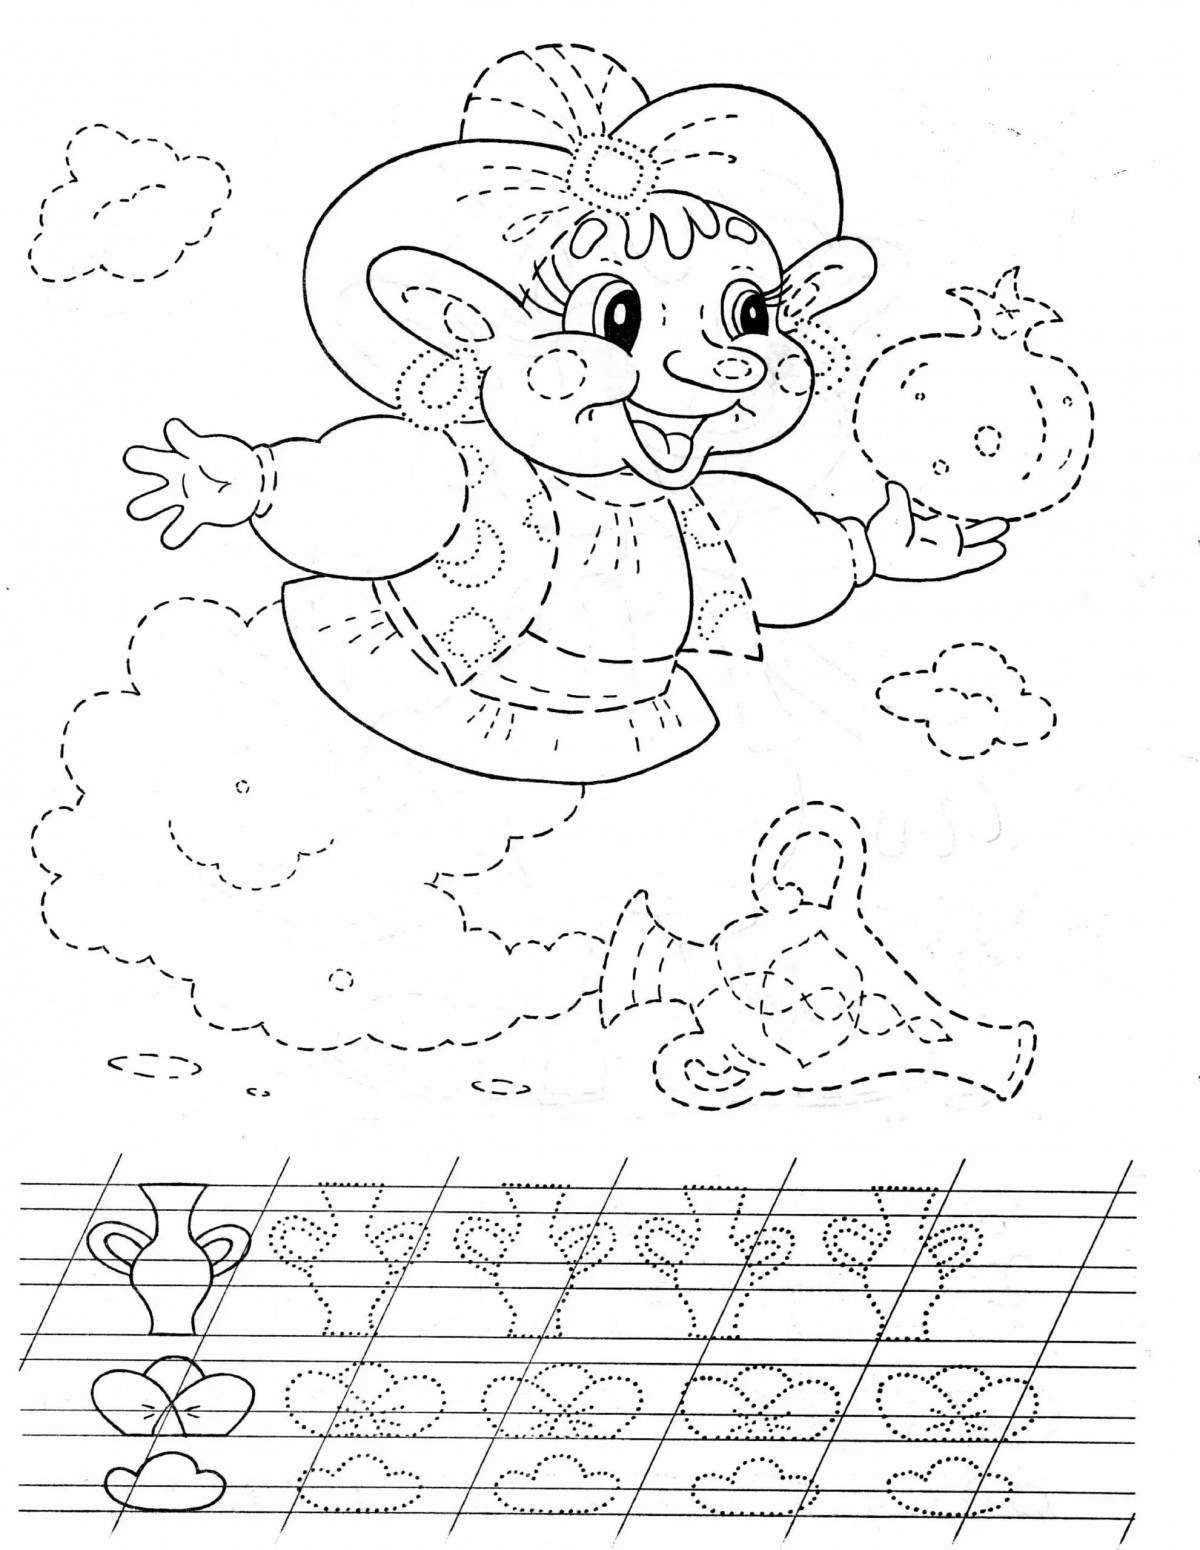 Coloring book for children 5-6 years old